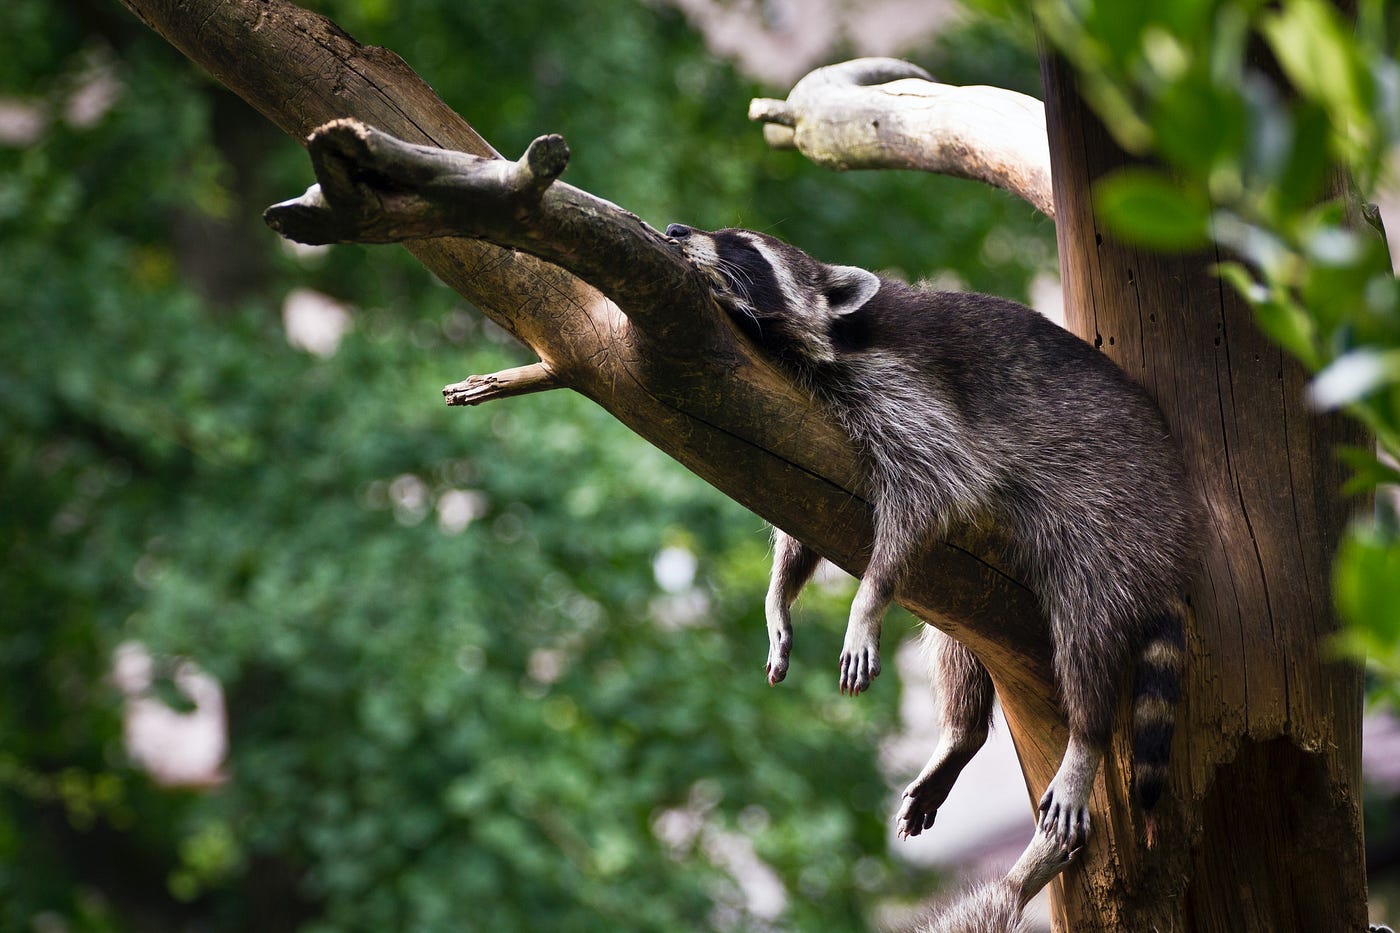 Raccoon sleeping in a tree with his limbs hanging down